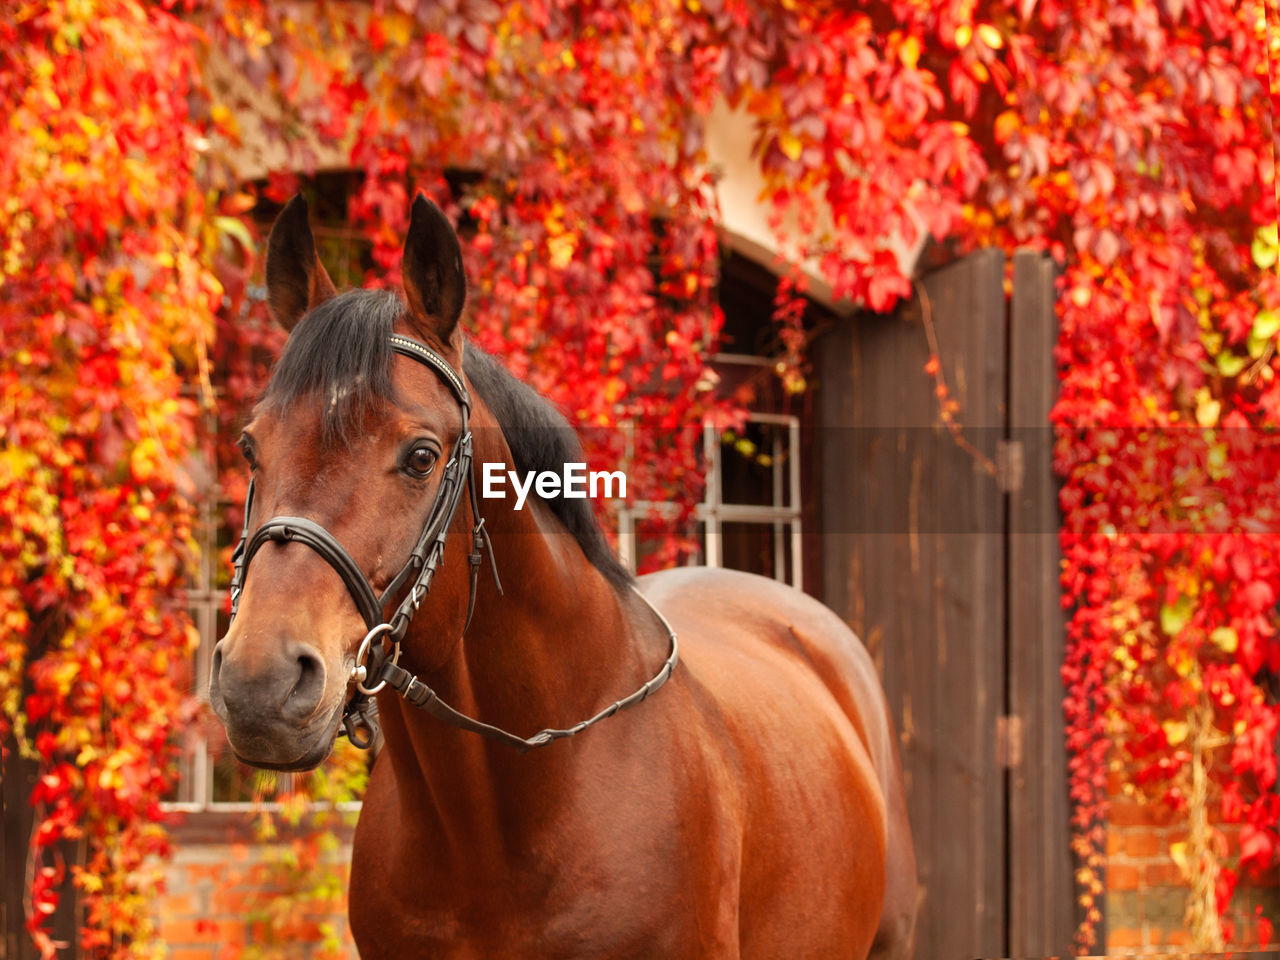 HORSE IN A RED AUTUMN